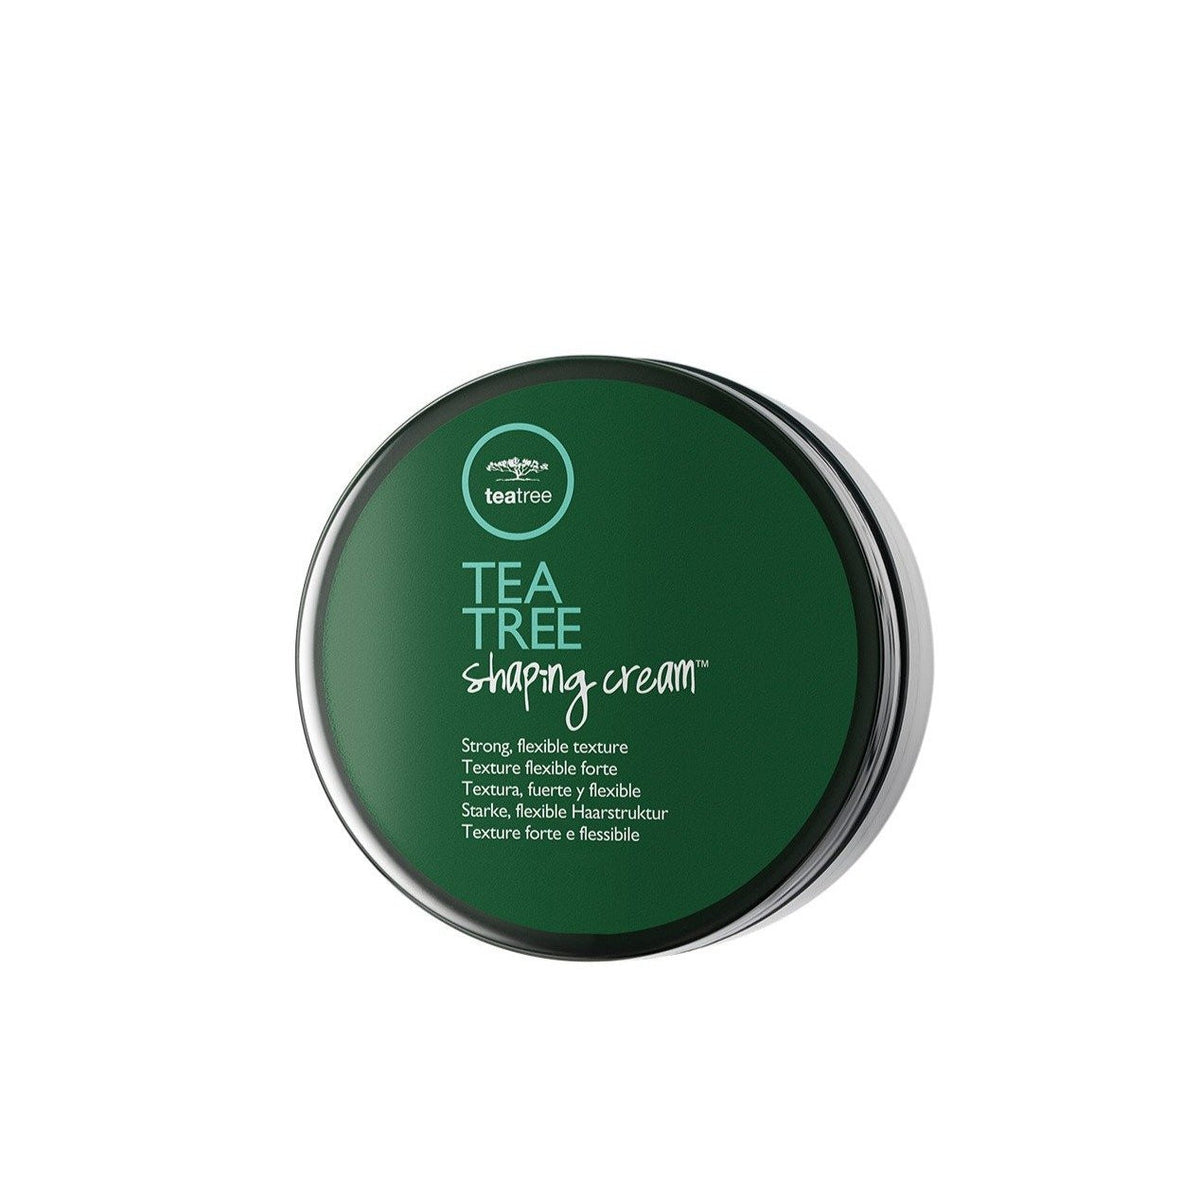 Tea Tree Shaping Cream - 89ML - by Paul Mitchell |ProCare Outlet|